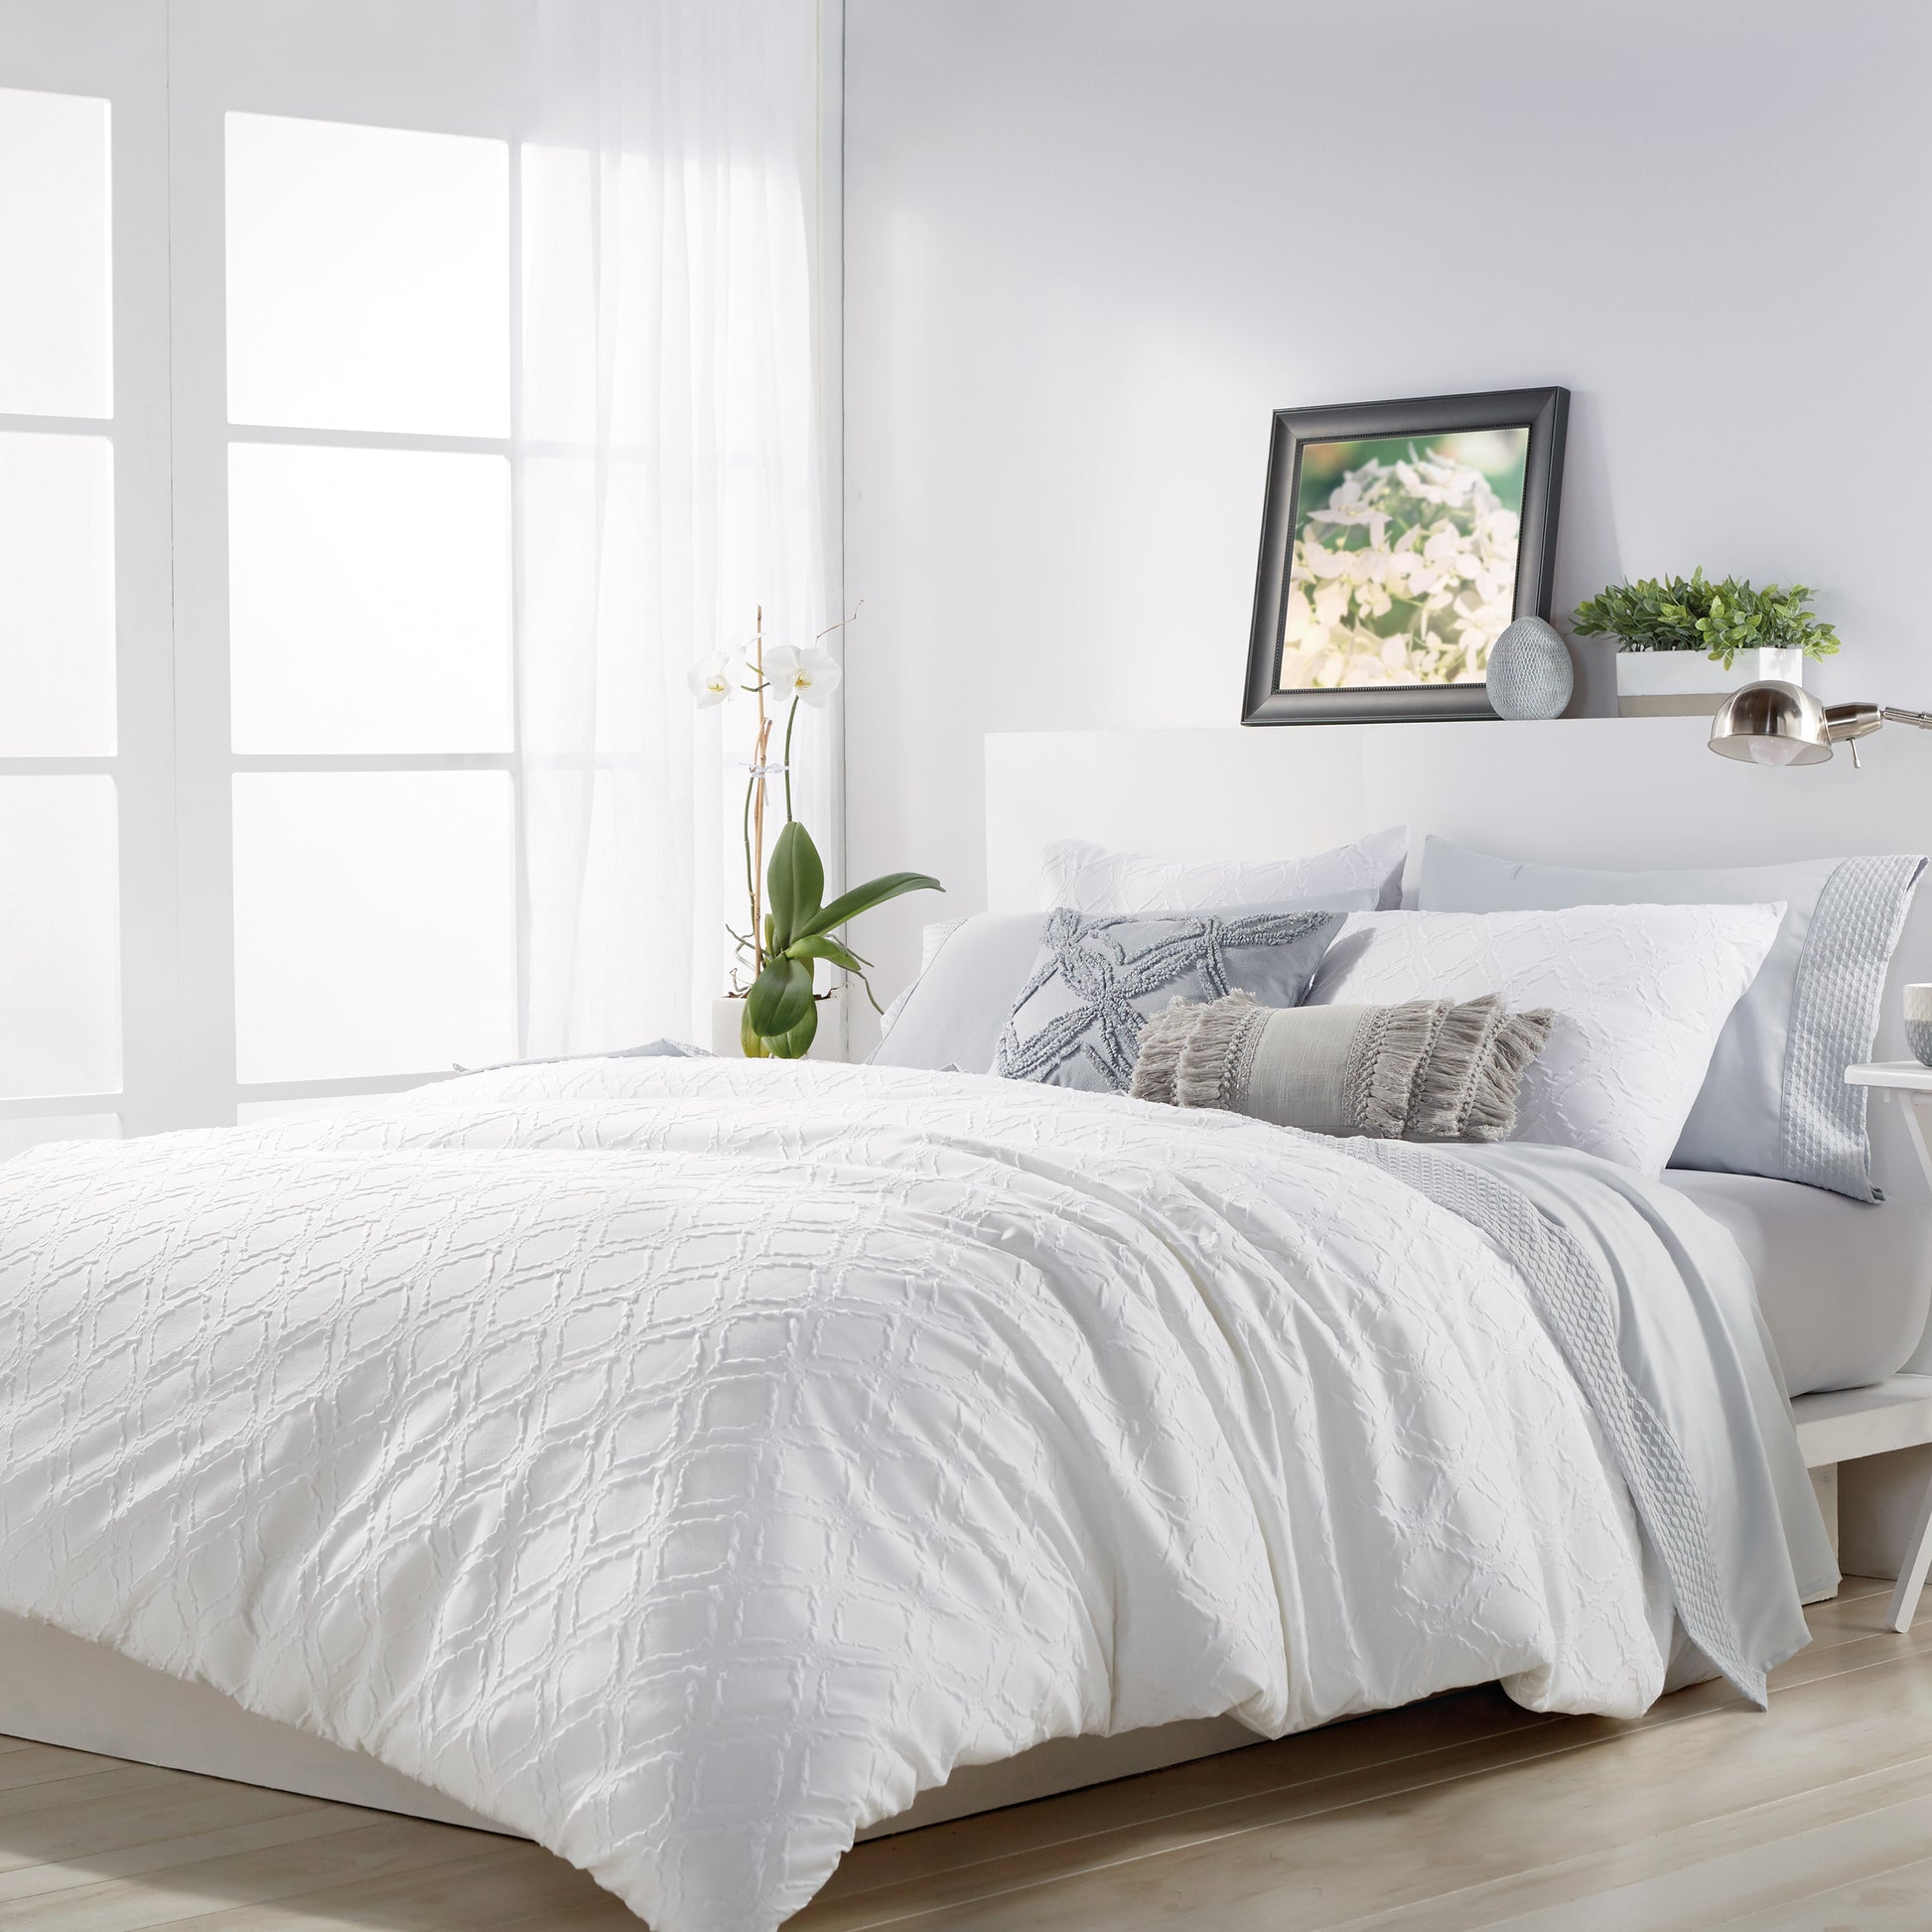 Microsculpt Solid Ogee Comforter Set white